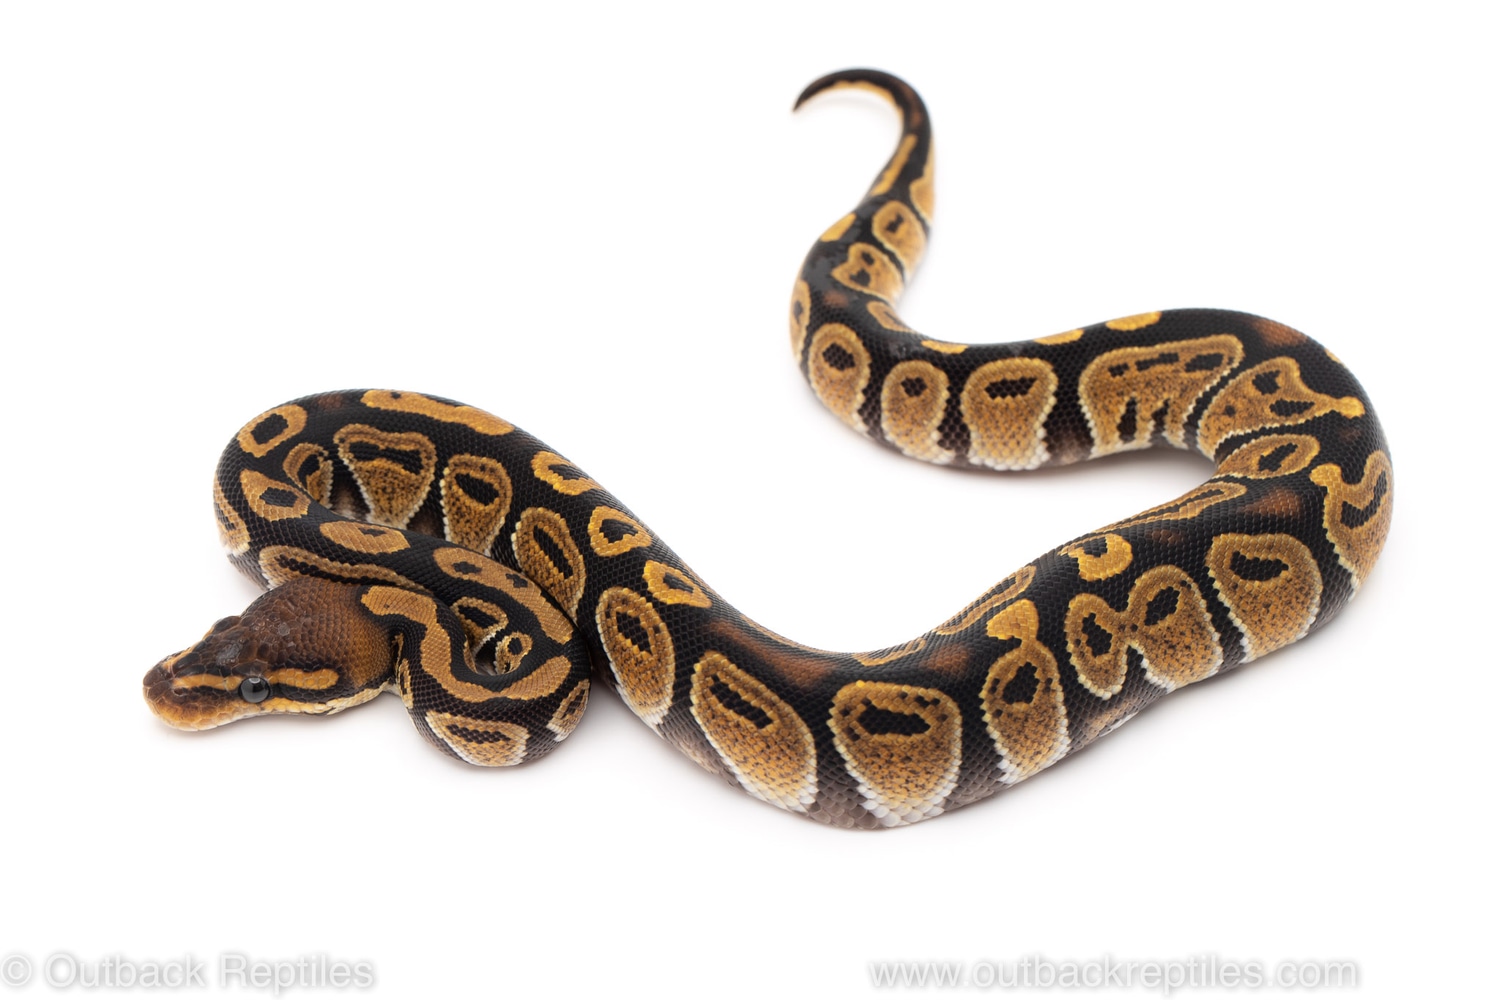 Cypress Ball Python by Outback Reptiles